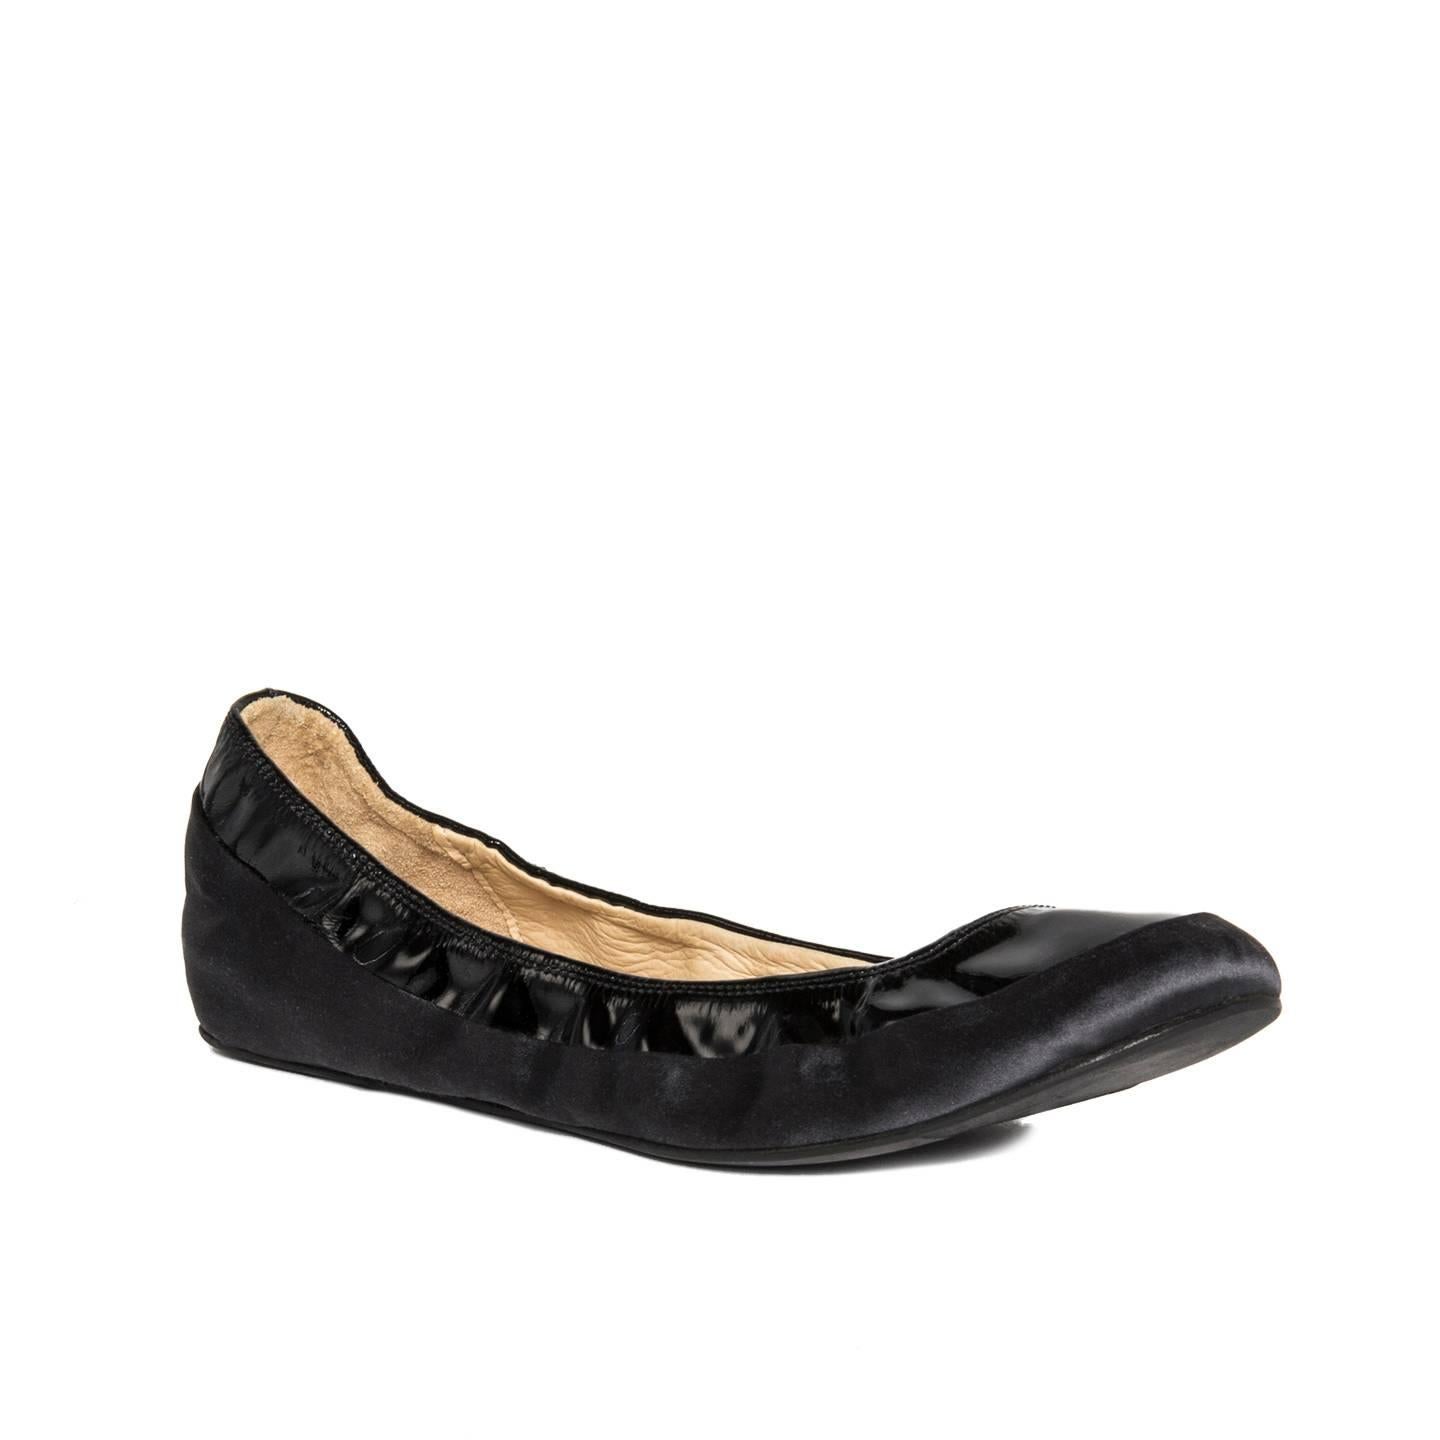 2007 collection black satin and patent leather scrunch ballet flats. Vero cuoio. Made in Italy. 

Size  40 Italian sizing 

Condition  Excellent: never worn